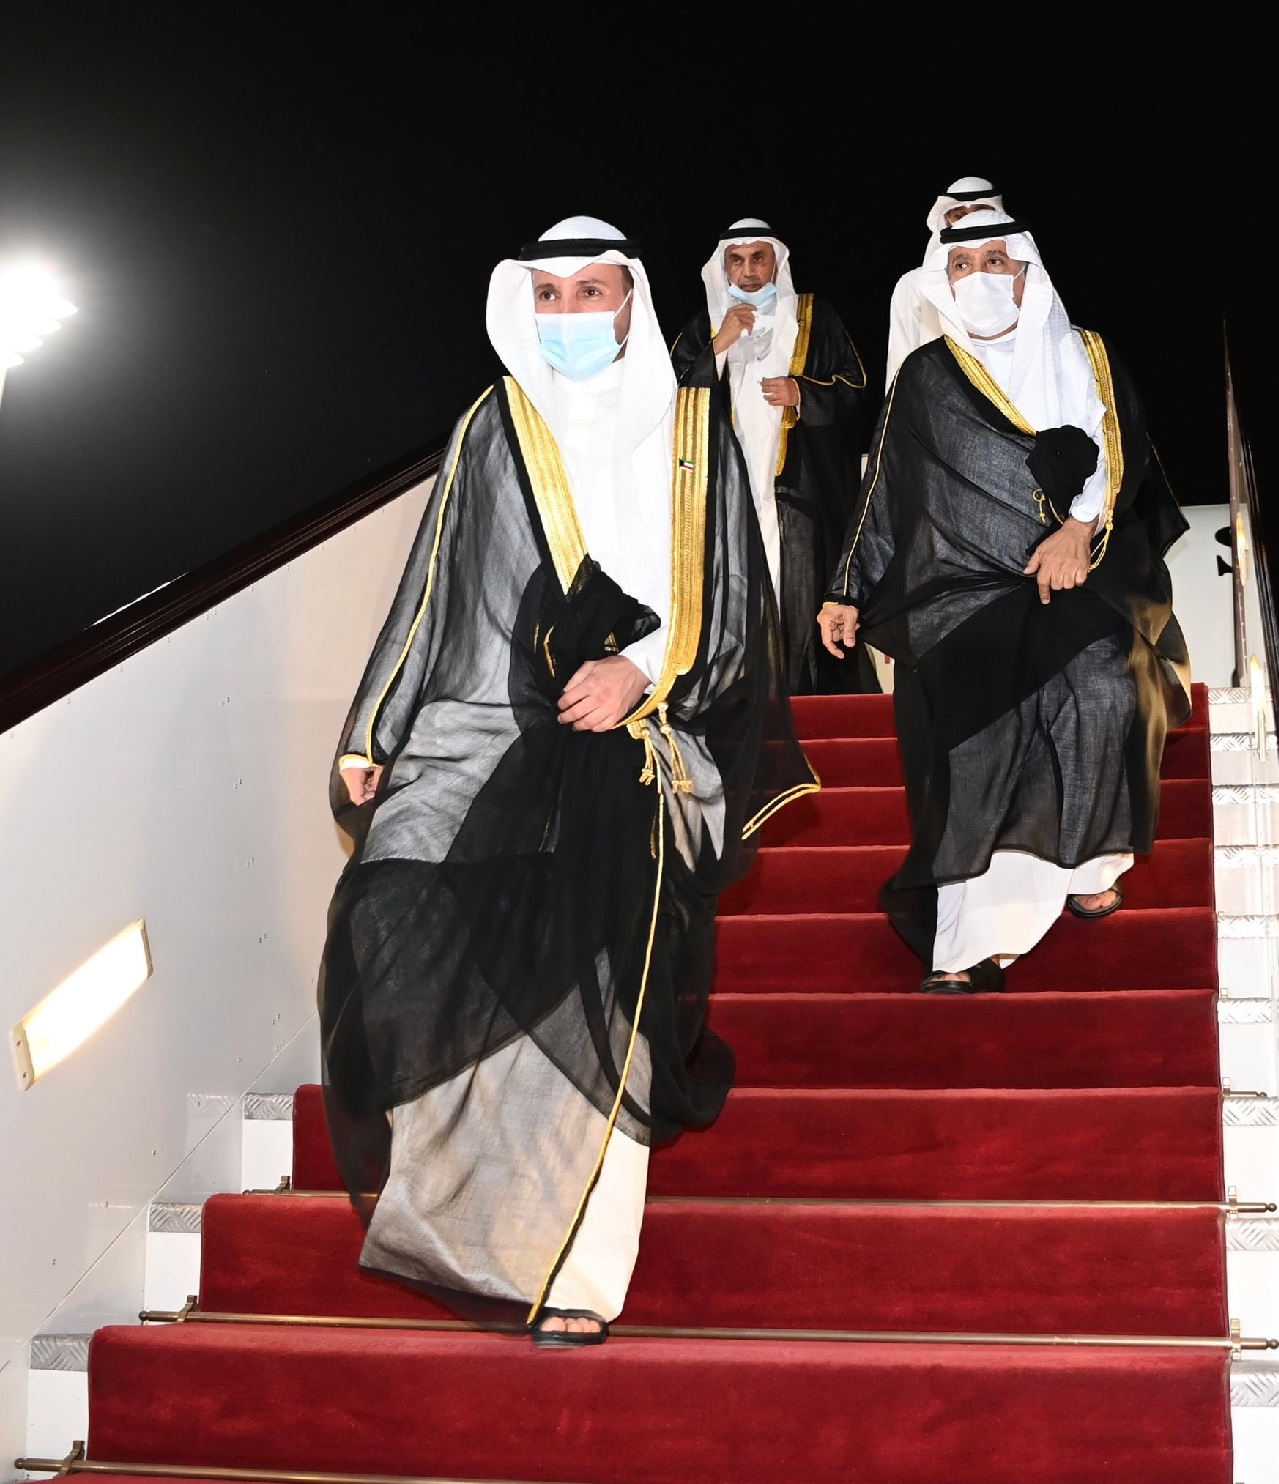 Kuwait's National Assembly Speaker Marzouq Al-Ghanim arrives in Doha for two-day visit